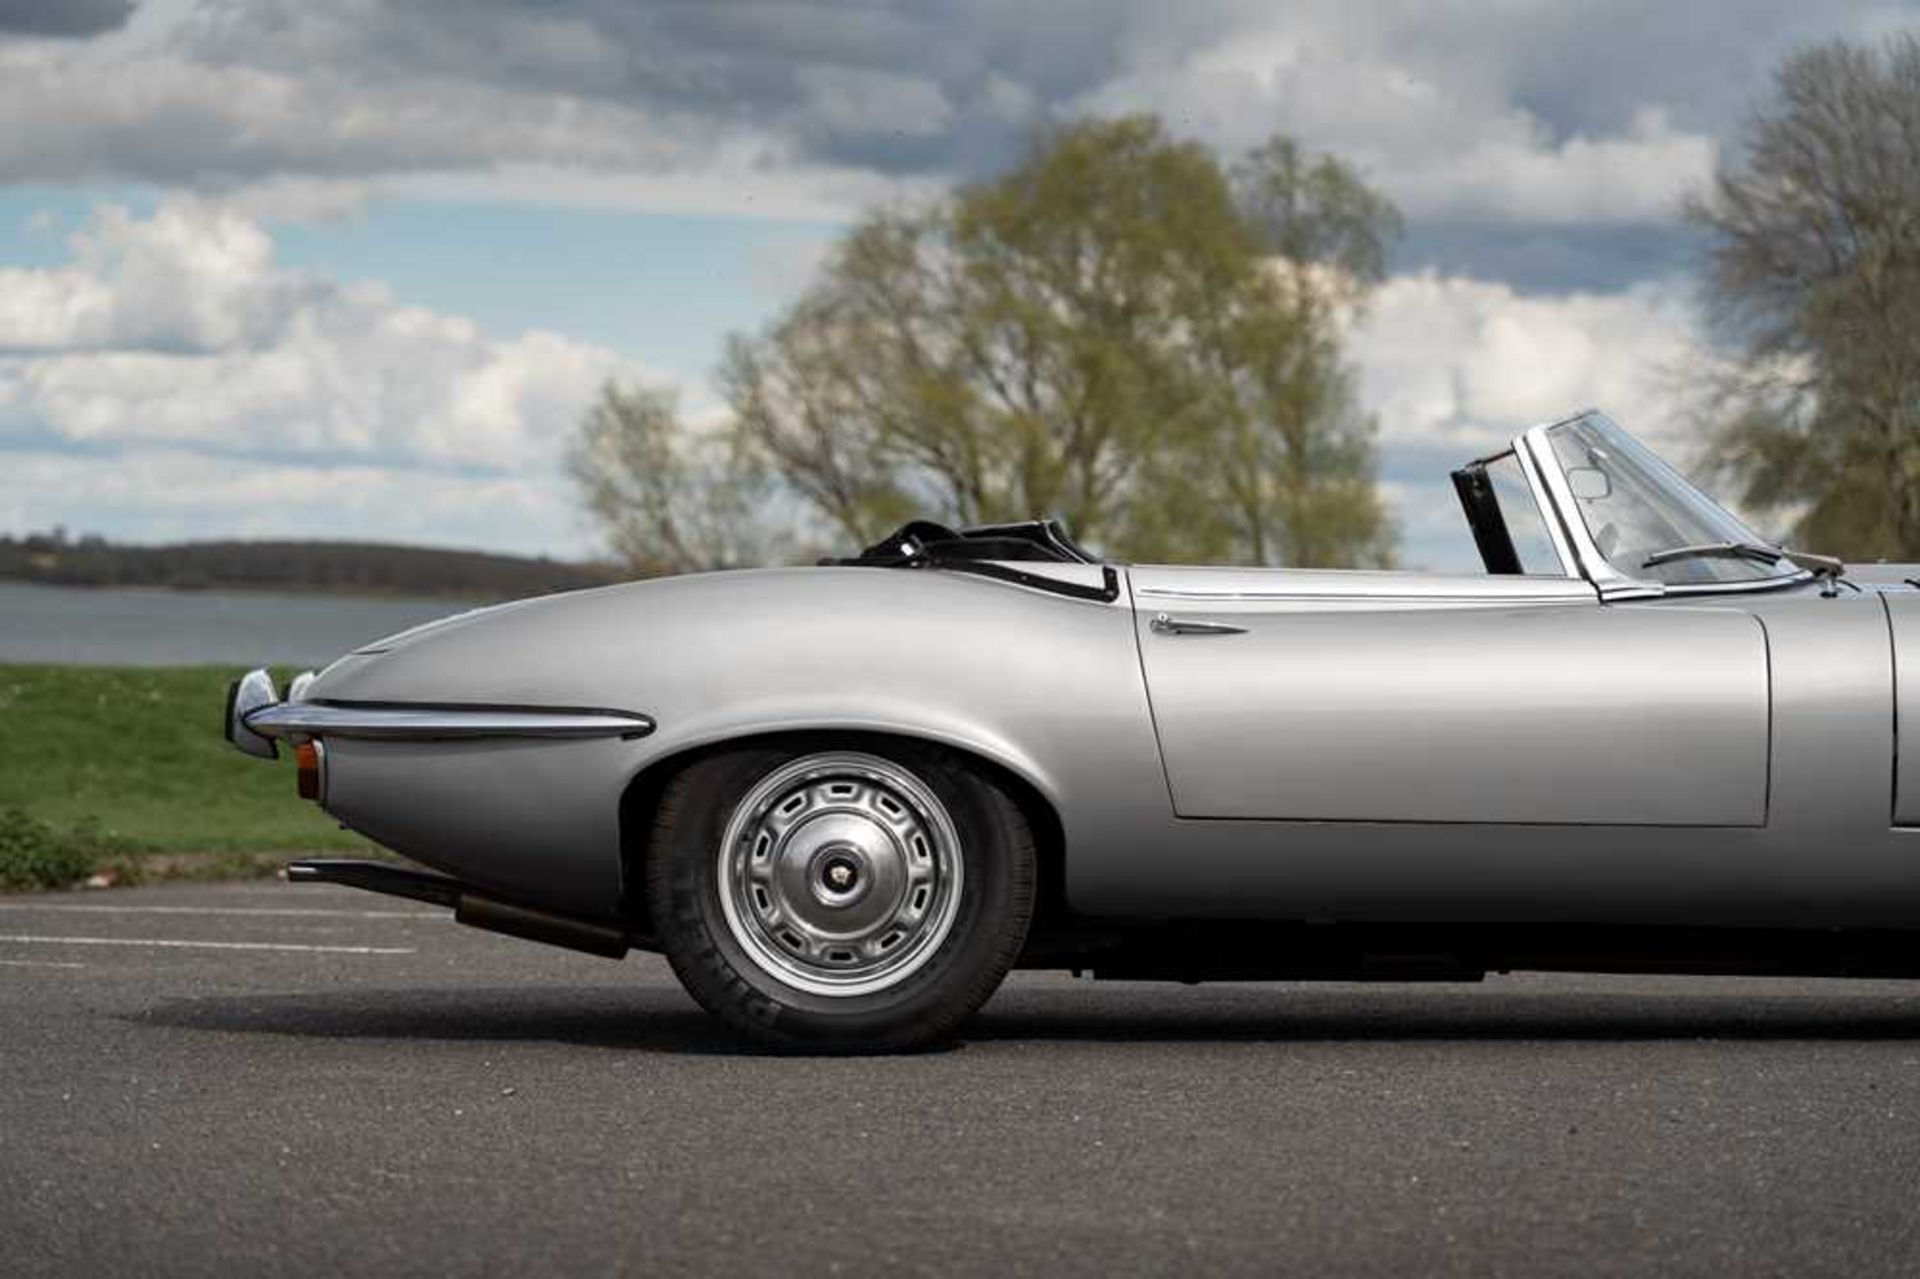 1974 Jaguar E-Type Series III V12 Roadster Only one family owner and 54,412 miles from new - Image 48 of 89